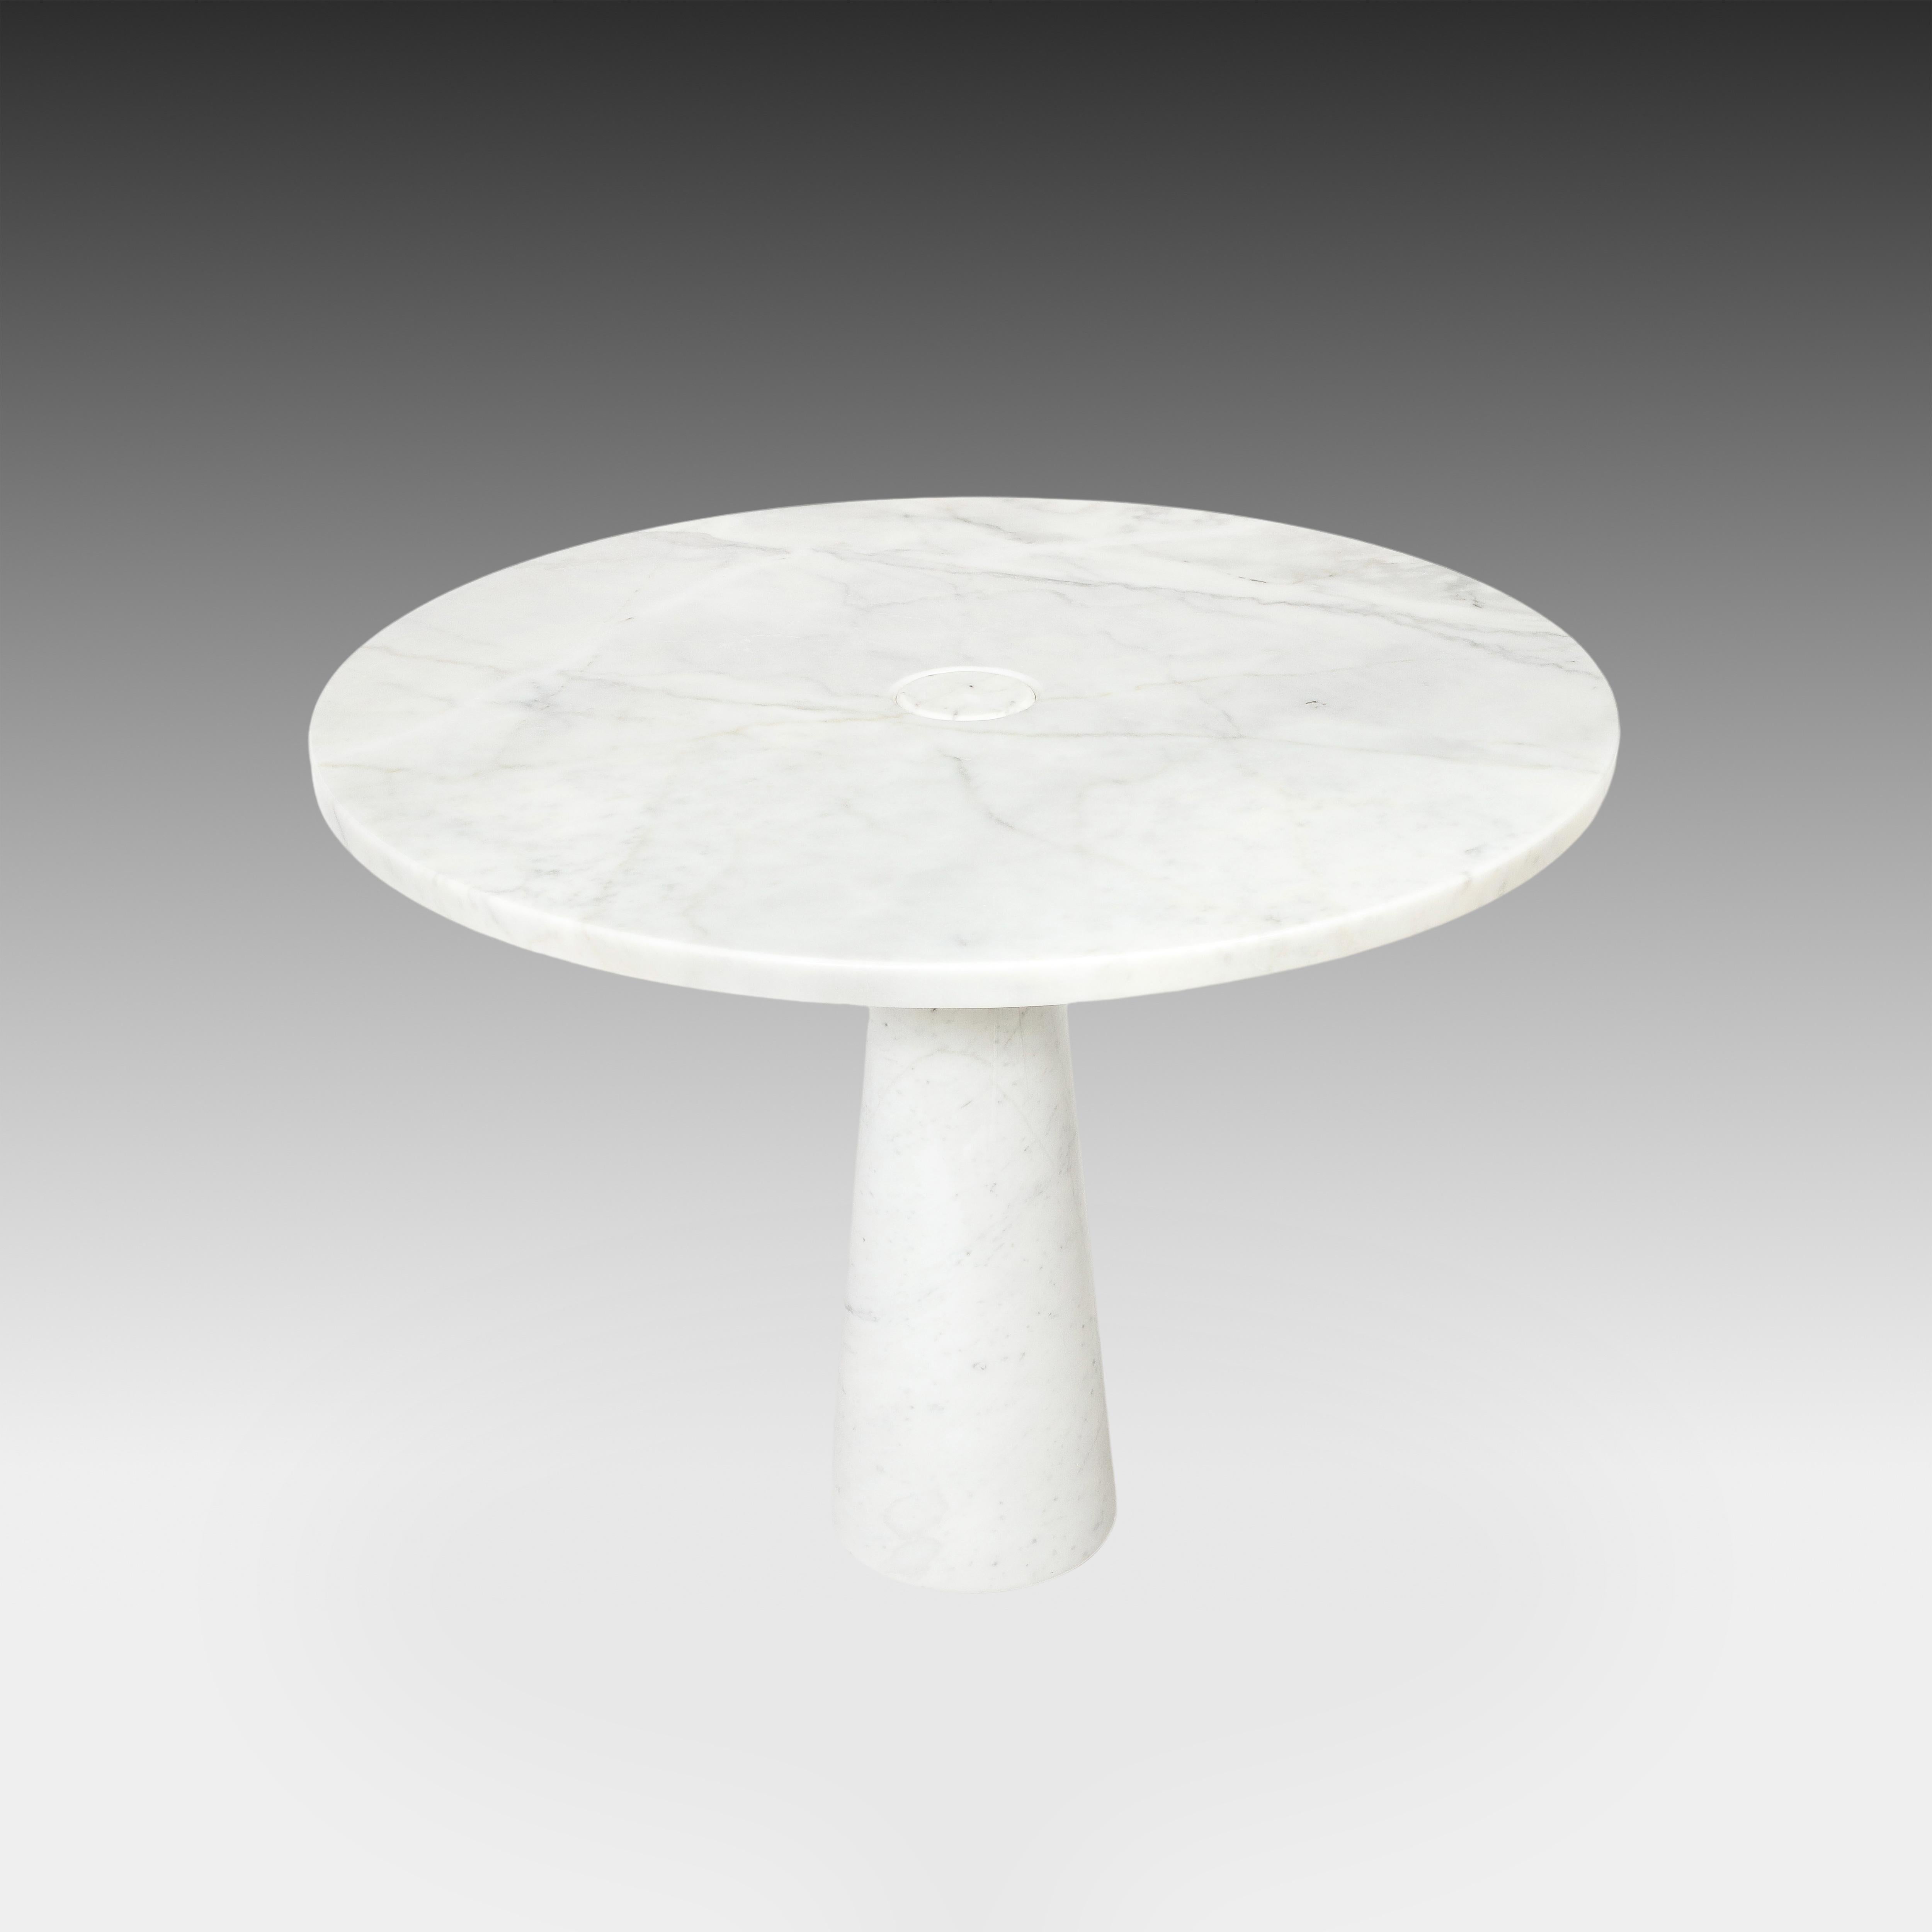 Designed by Angelo Mangiarotti for Skipper from the 'Eros' series, Carrara marble round dining or center table with top fitted on a conical base. This elegant organic table has beautiful subtle veining throughout the Carrara marble. Original Skipper